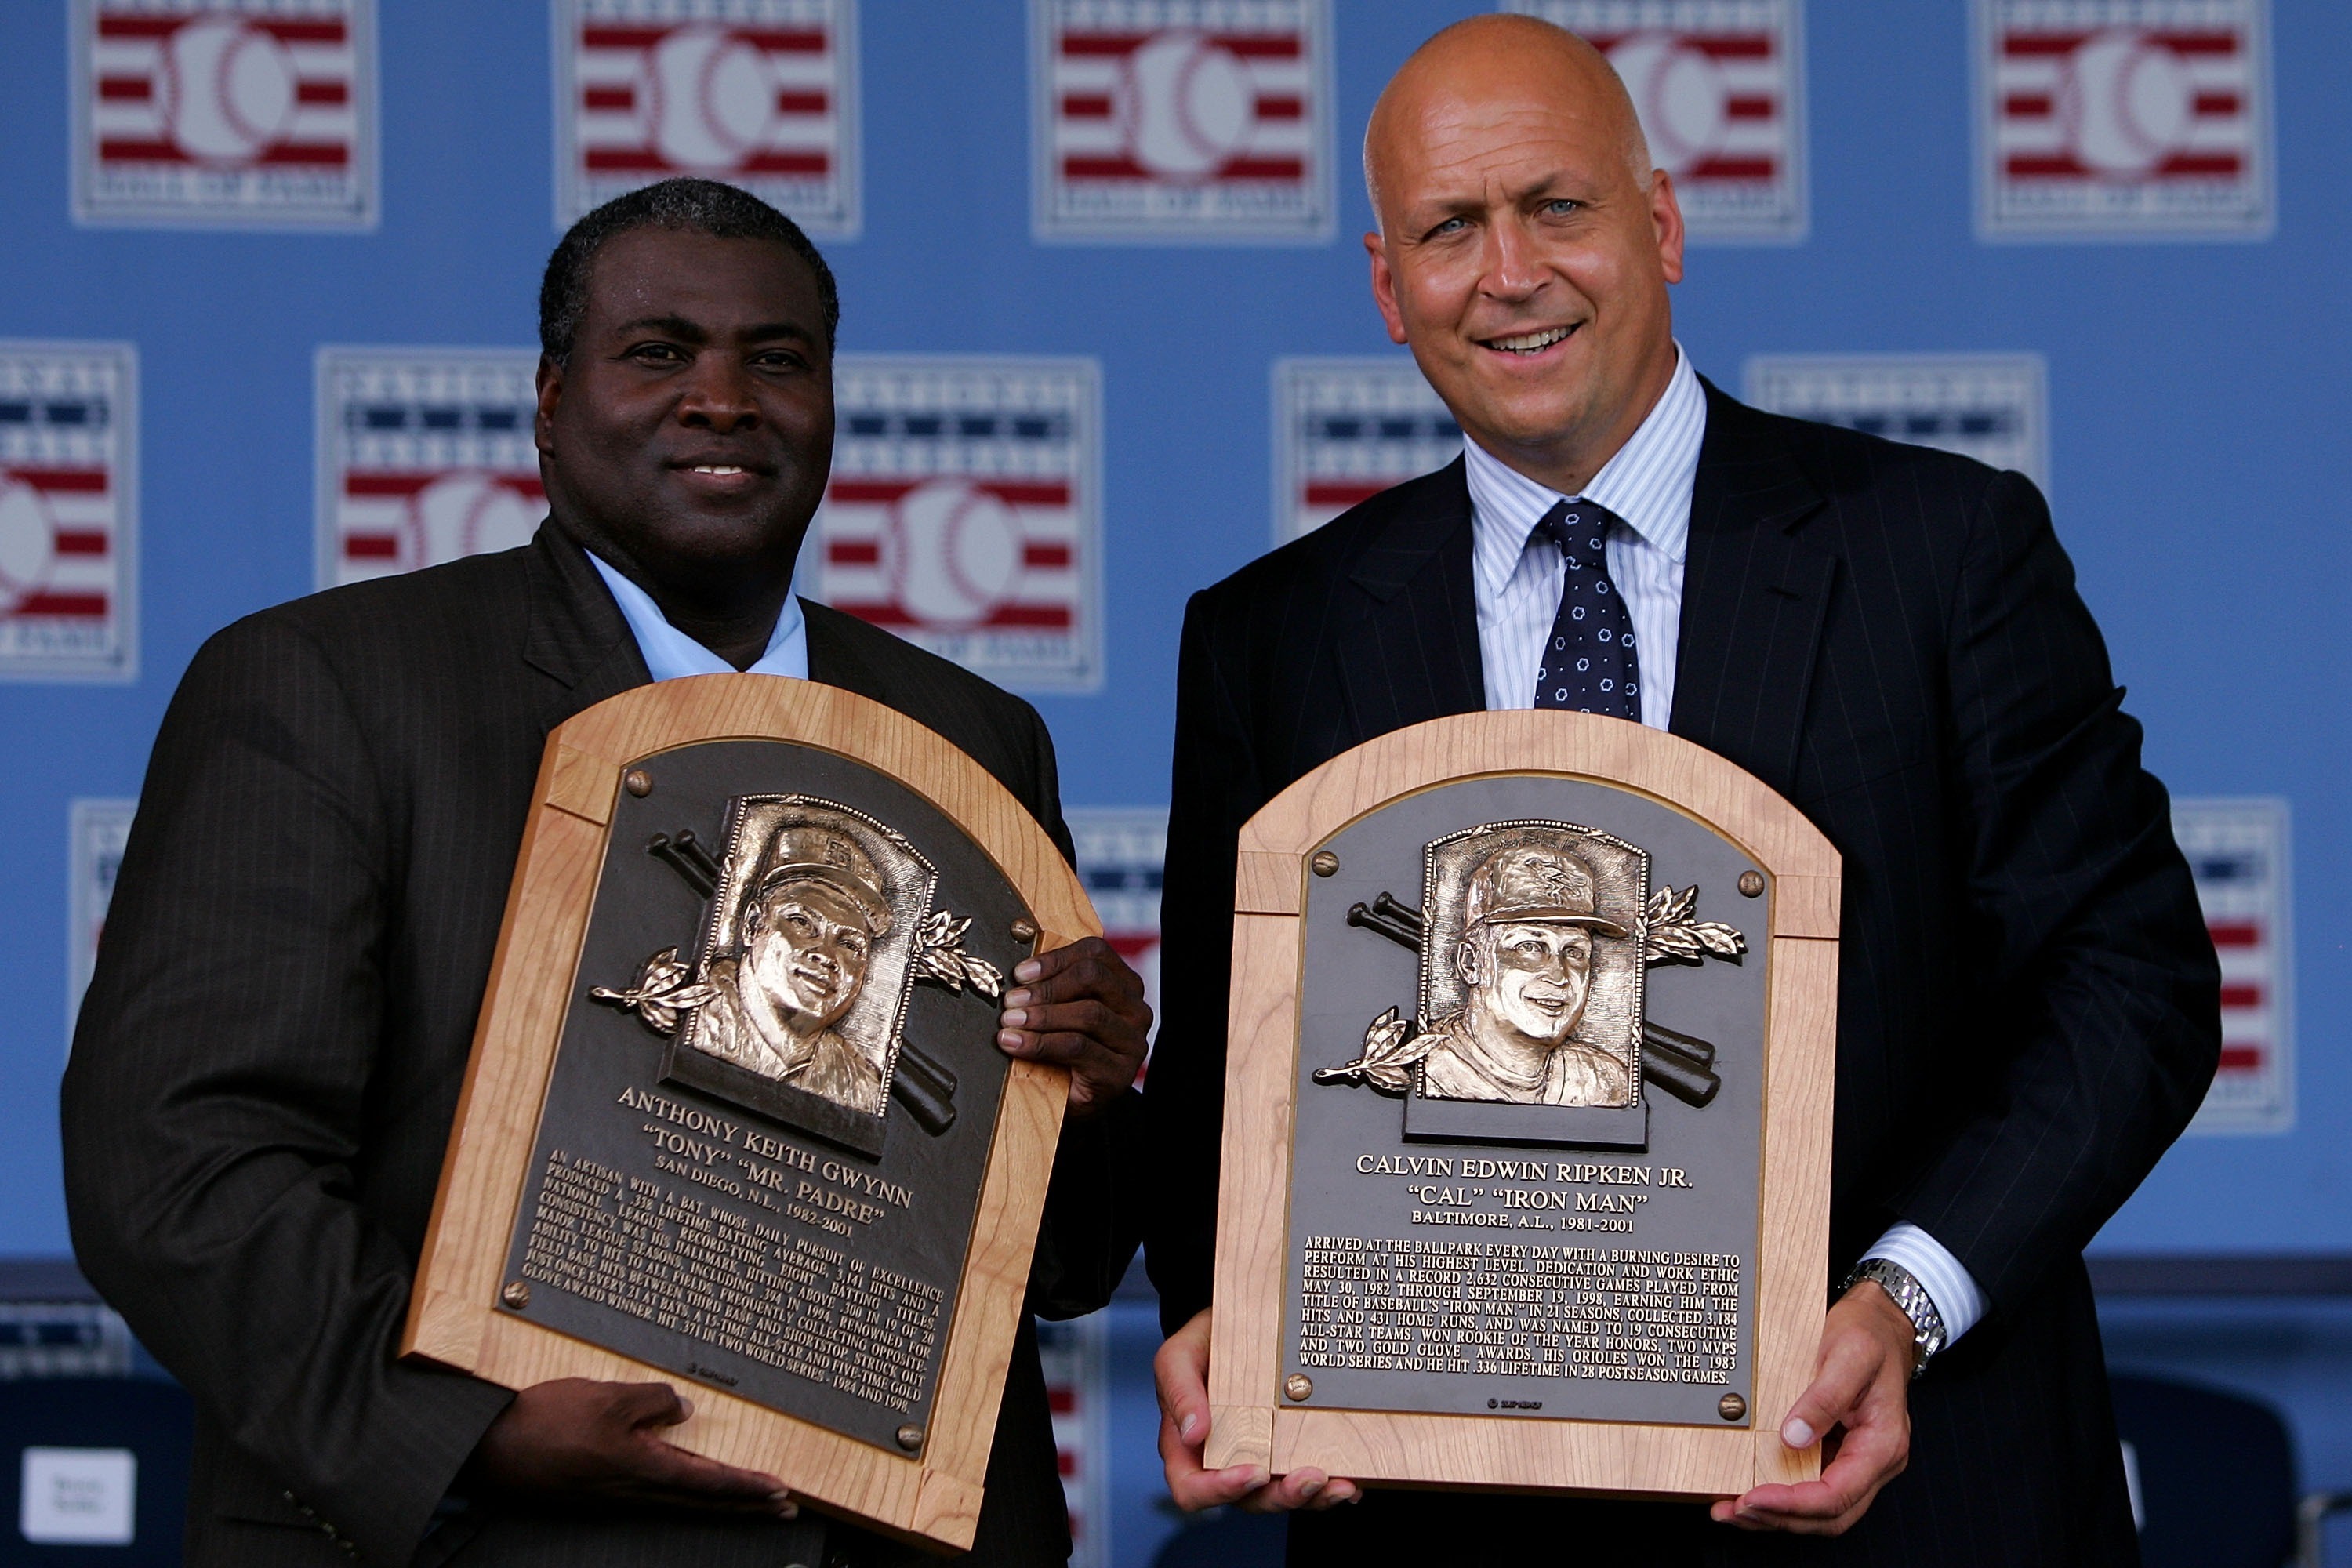 Winfield, Puckett take their place in the Hall of Fame